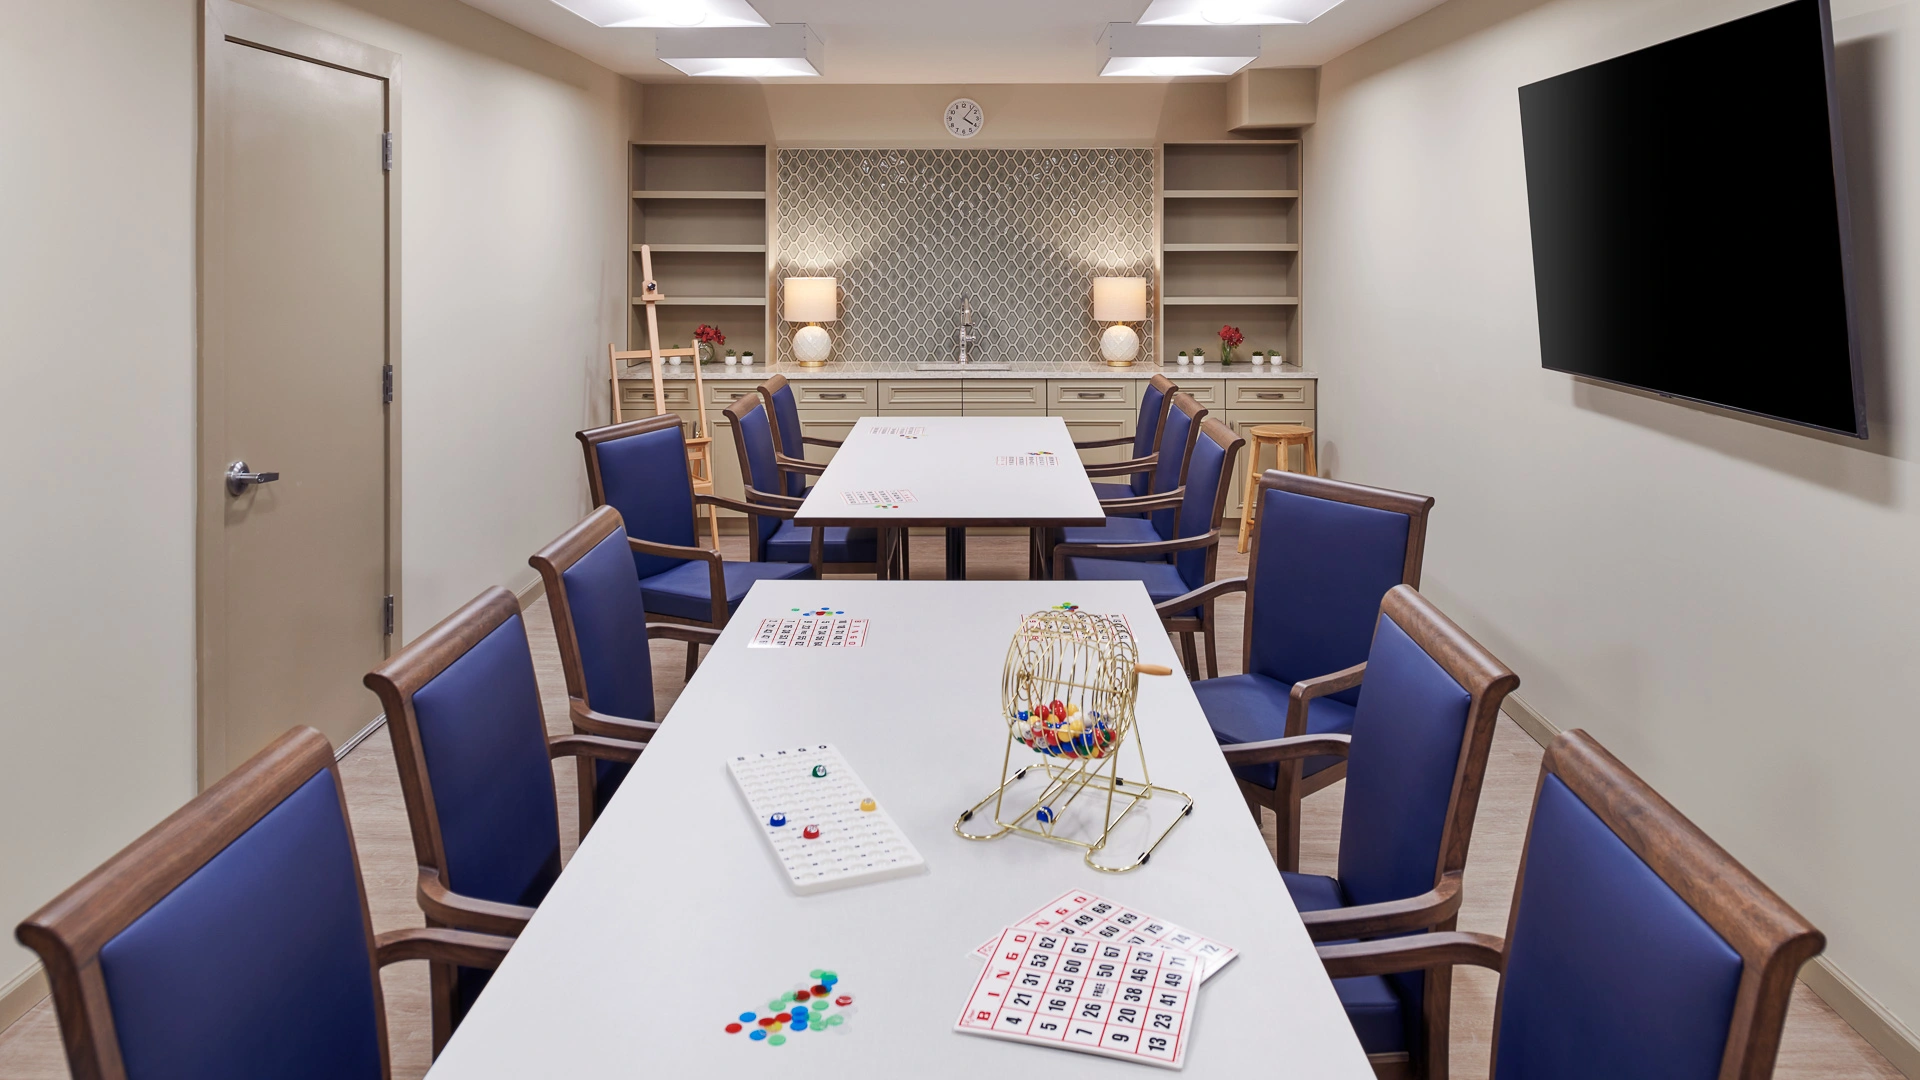 Activity room with bingo game set up at American House Senior Living in Bloomfield Hills, MI